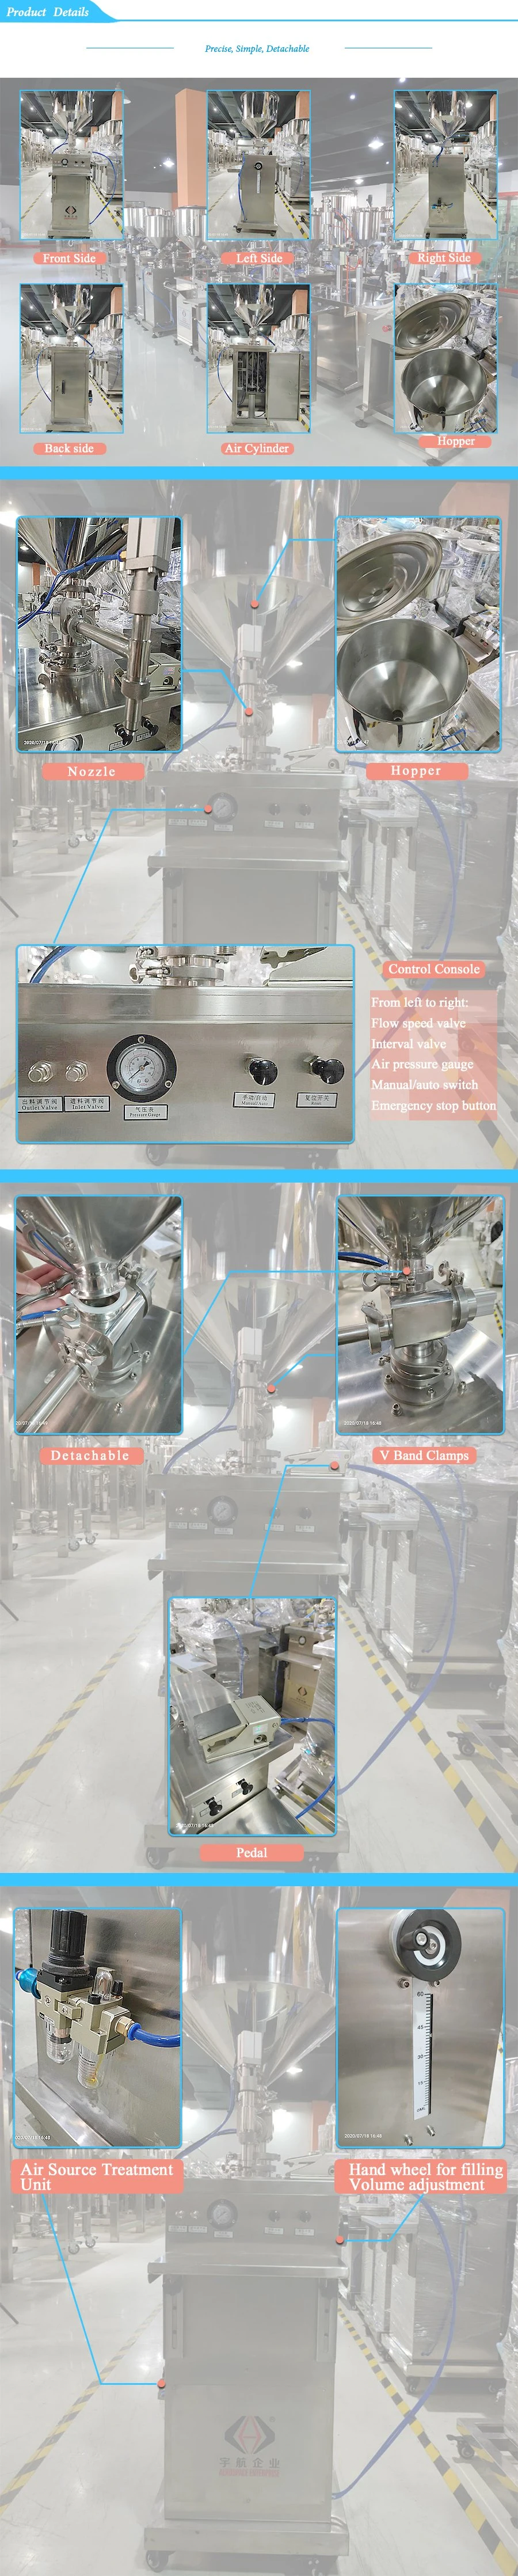 Semi Automatic Cream and Skin Care Products Tube Filling Sealing Packaging Machine